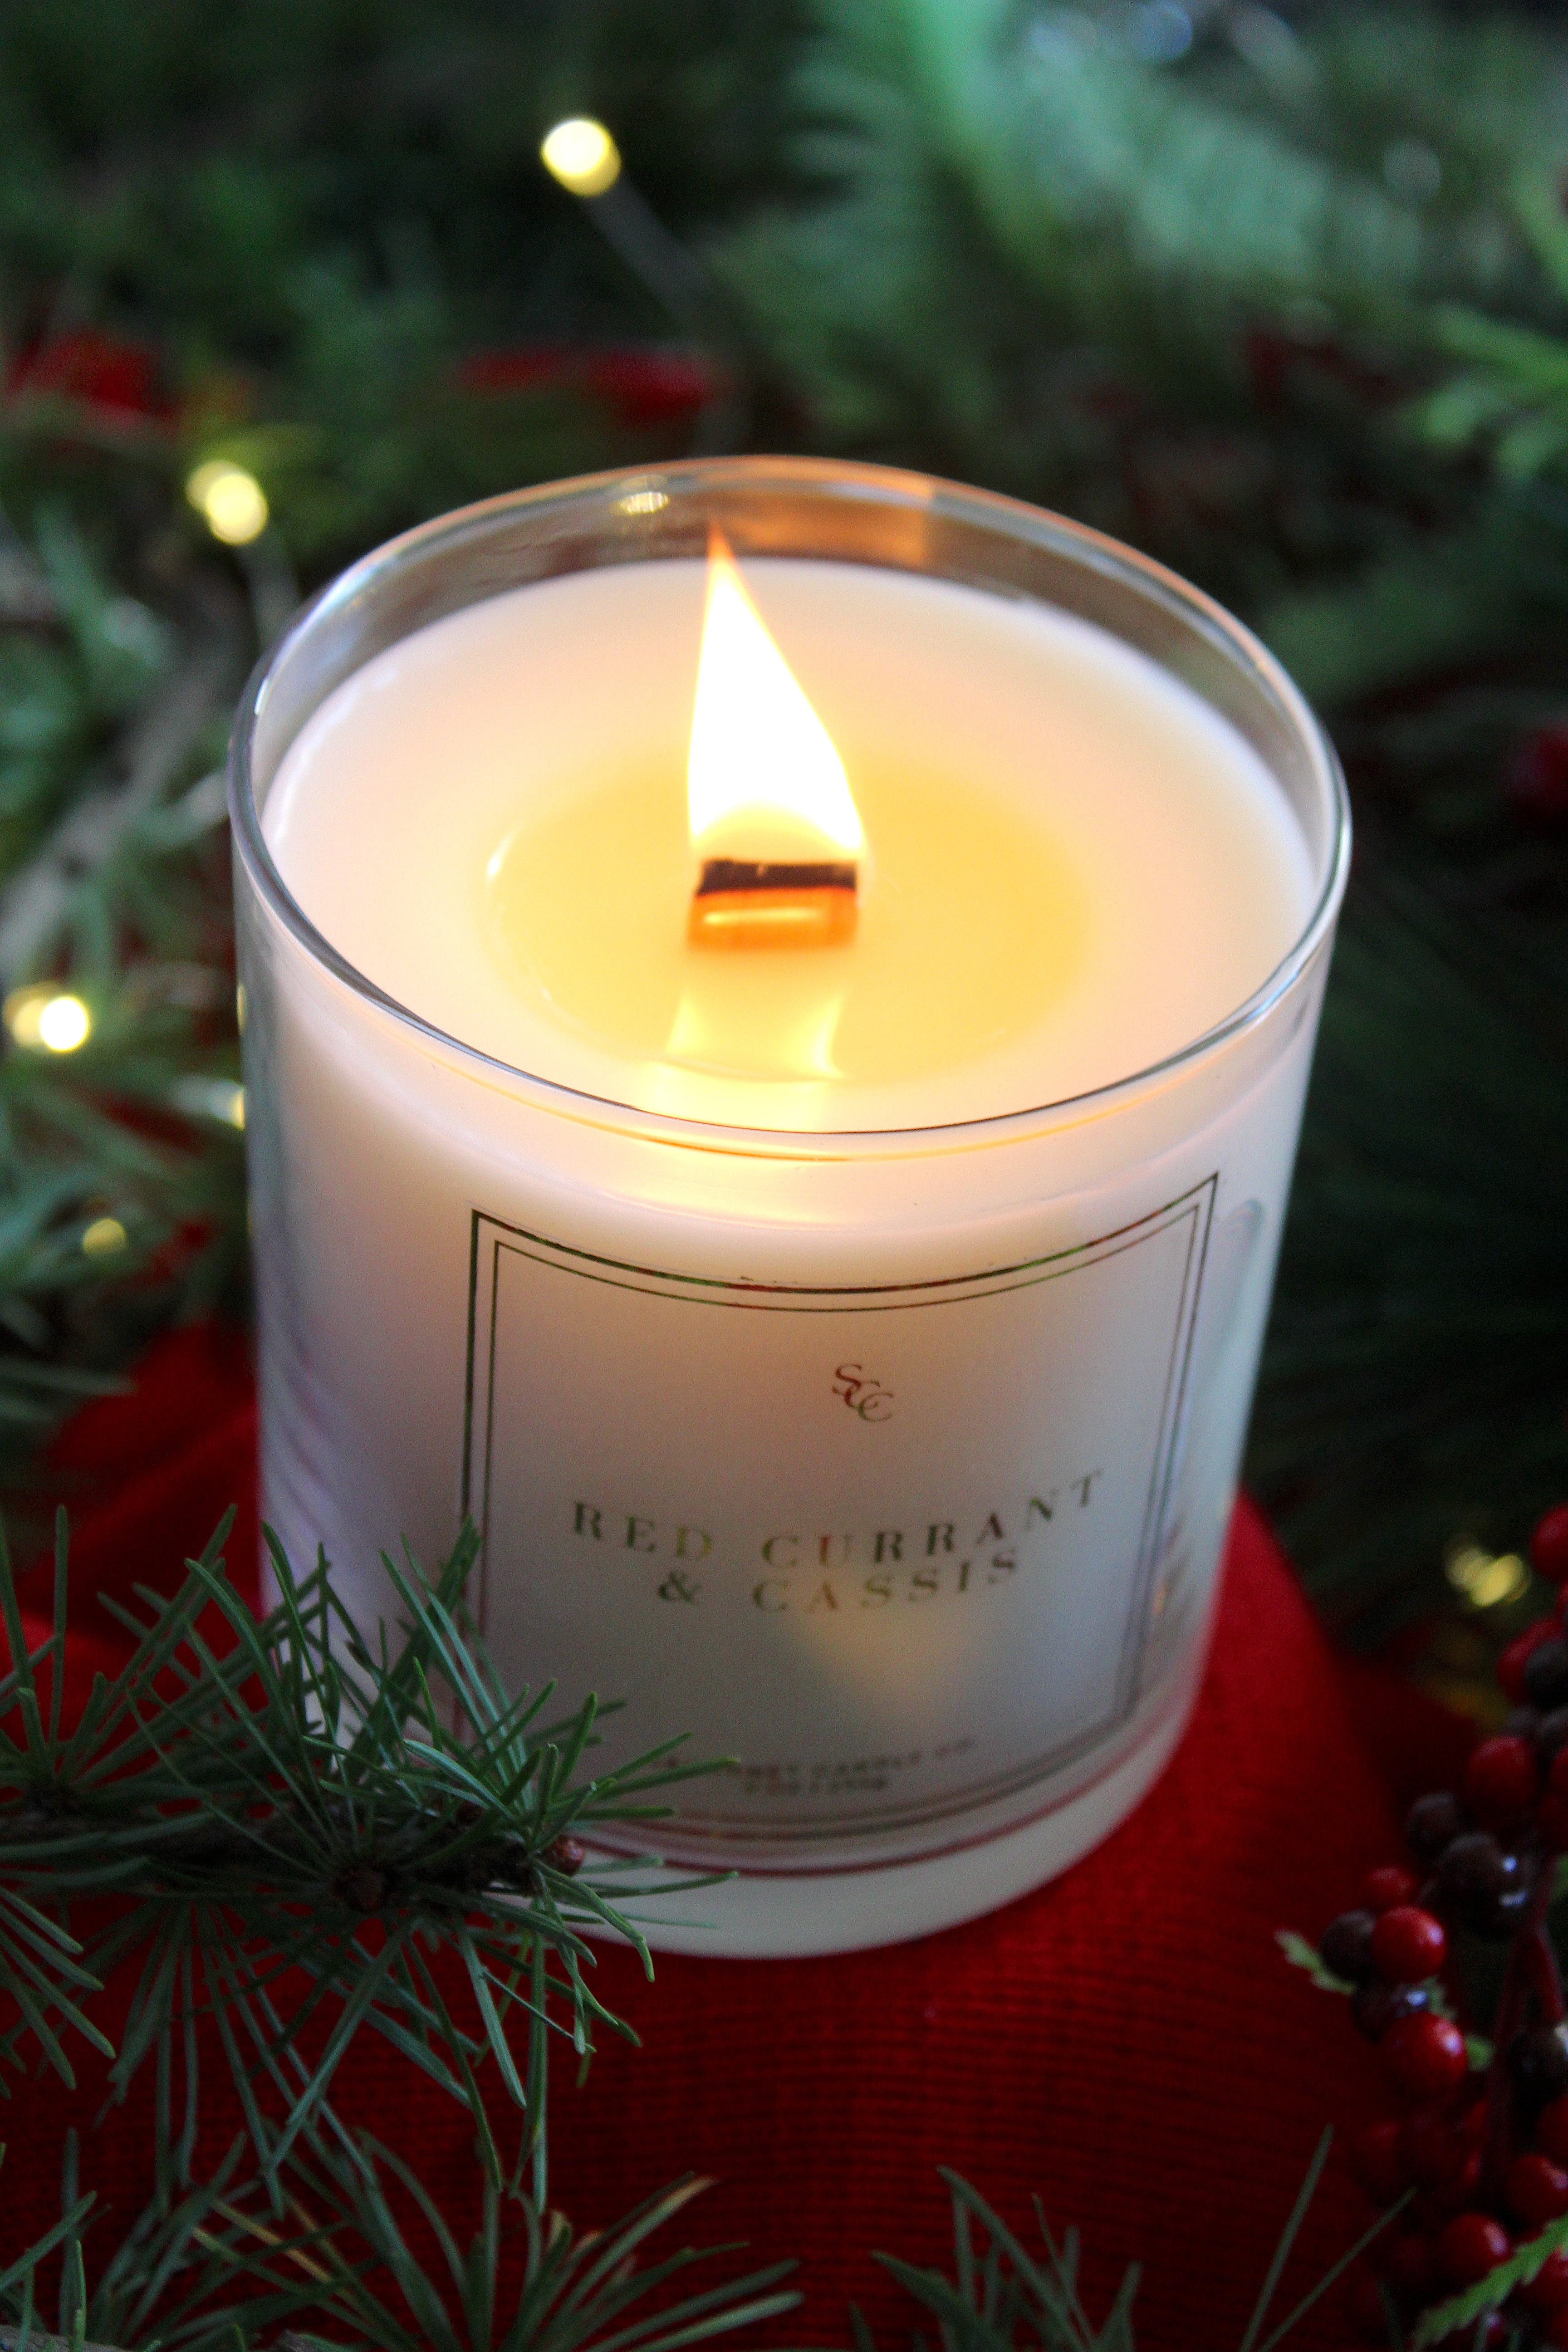 Red Currant & Cassis Soy Candle